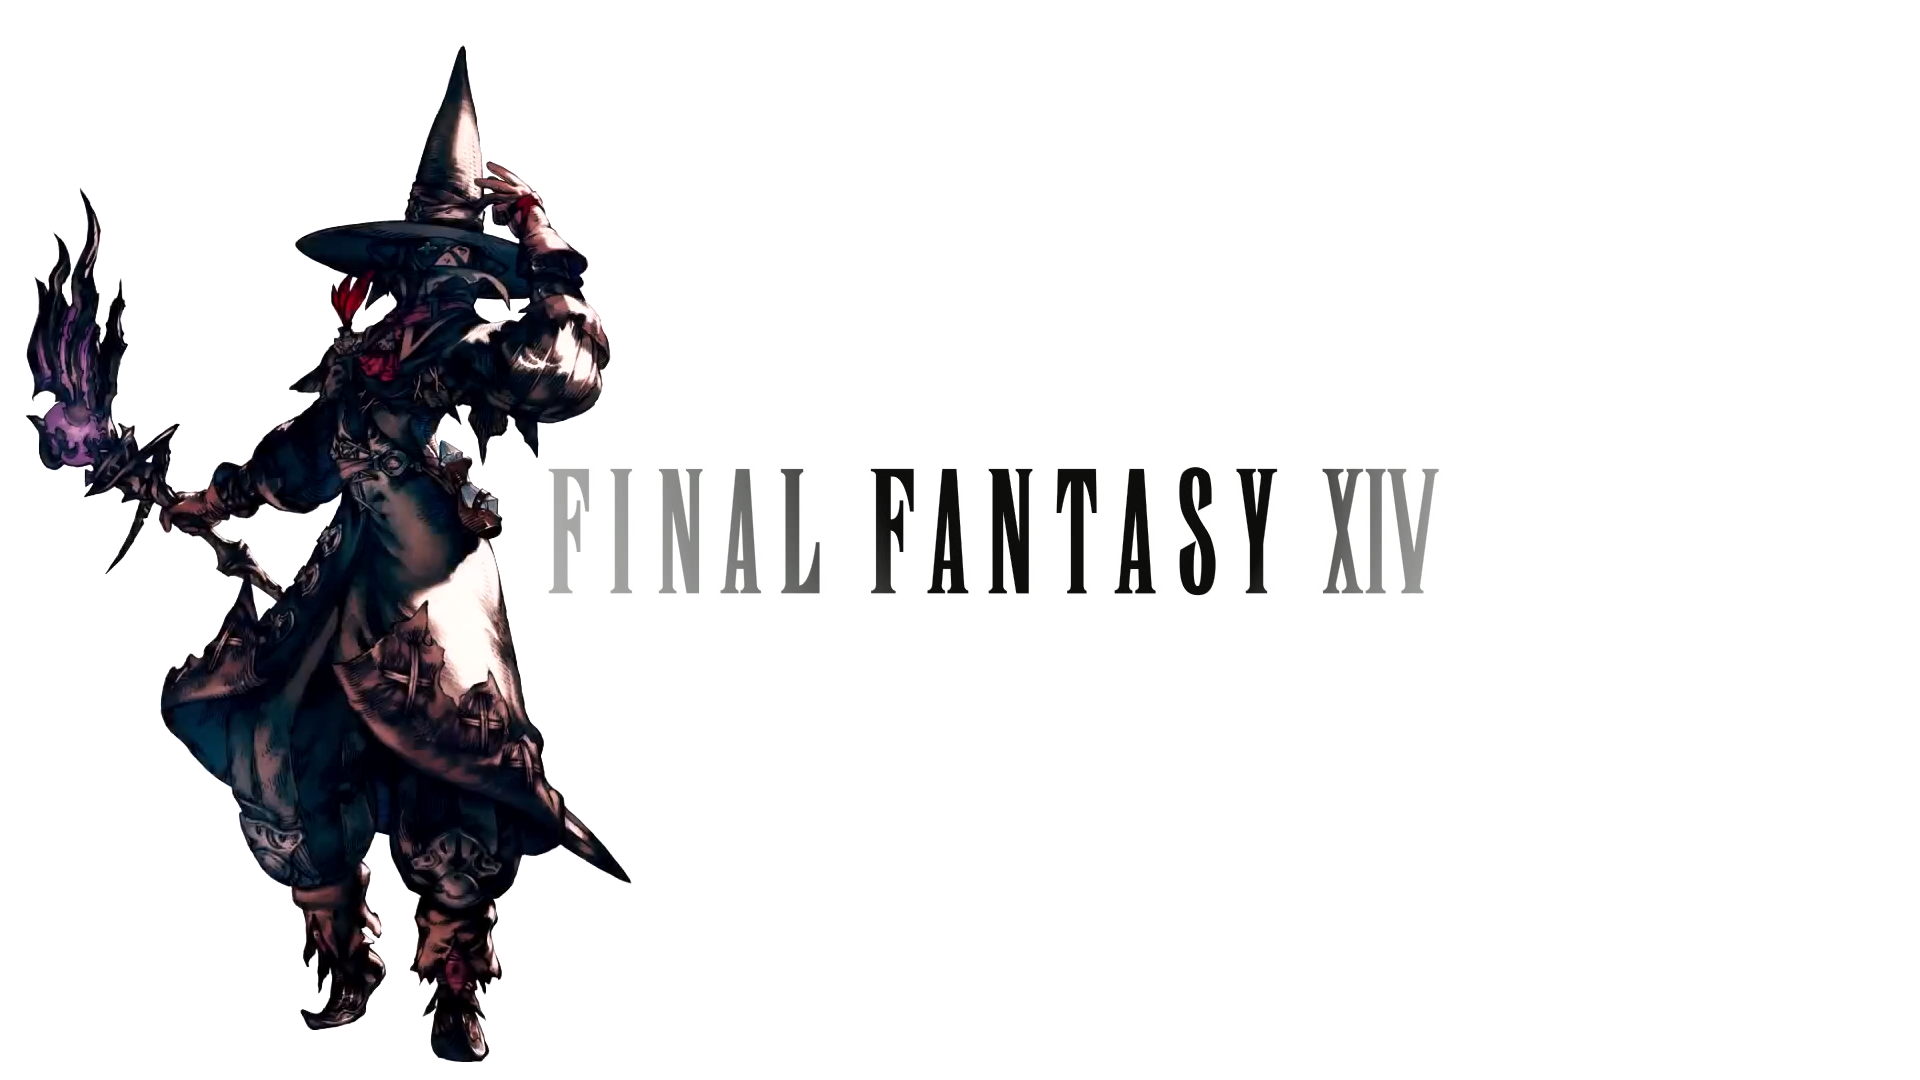 Final Fantasy Xiv Wallpaper Pictures Image